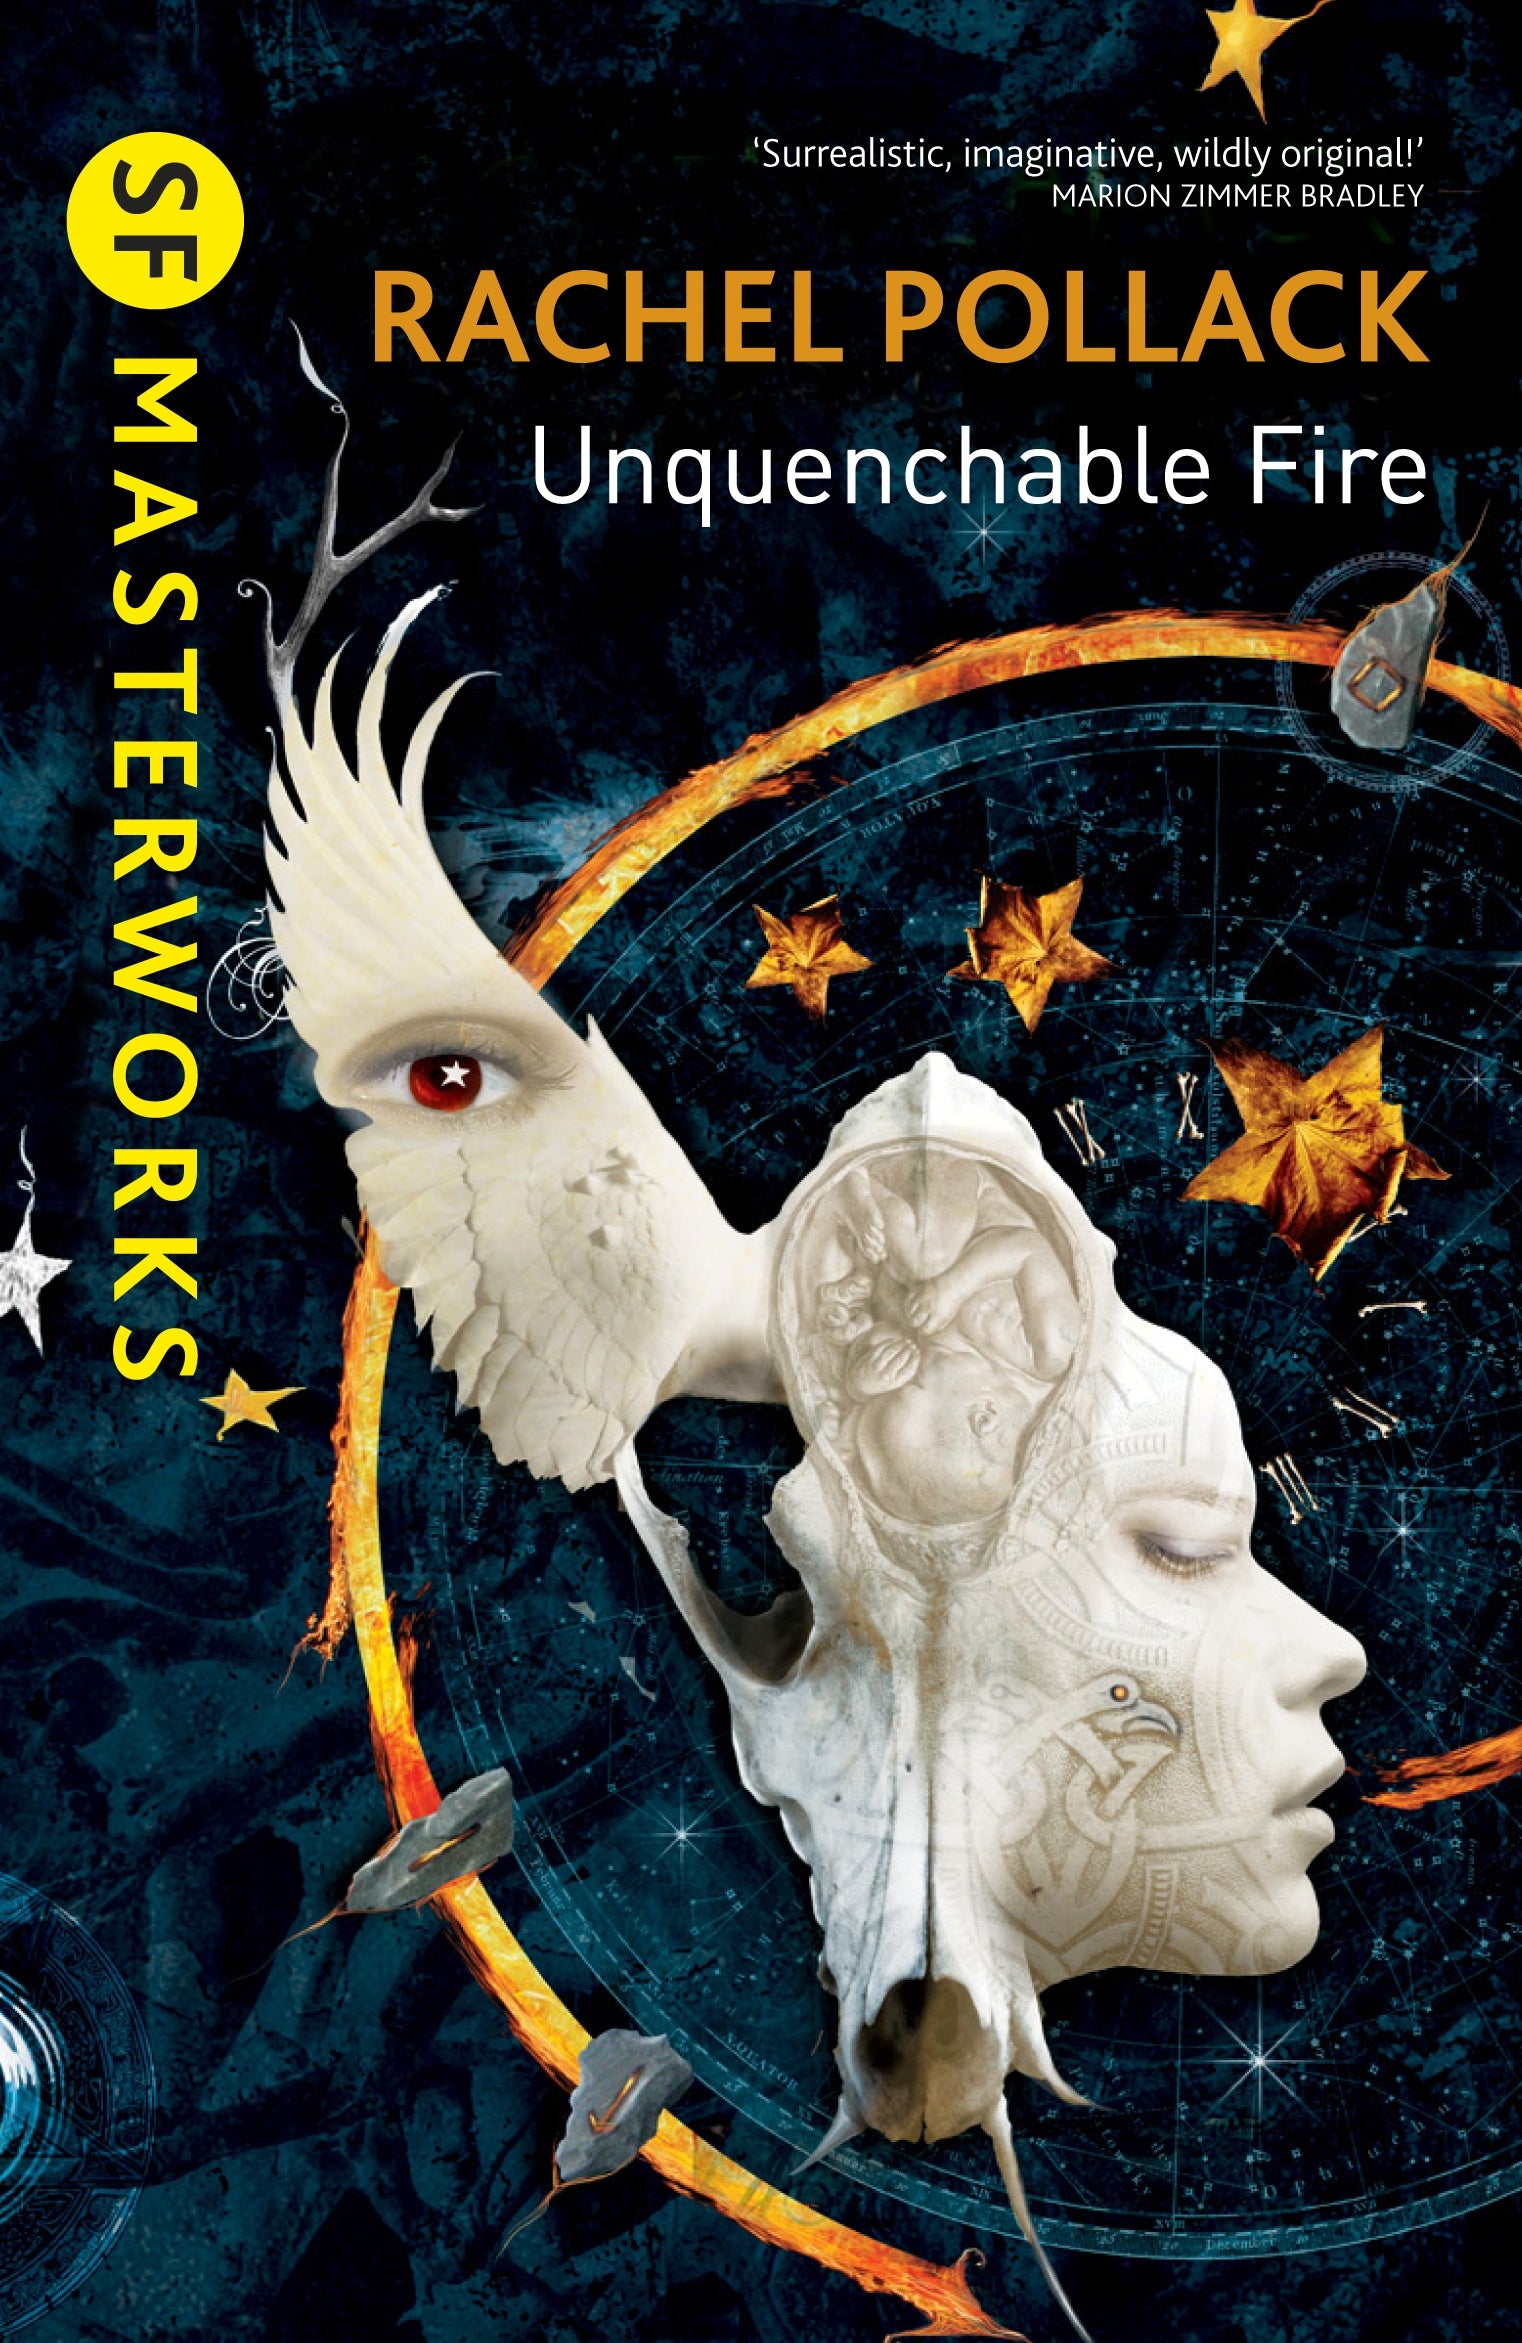 Unquenchable Fire by Rachel Pollack